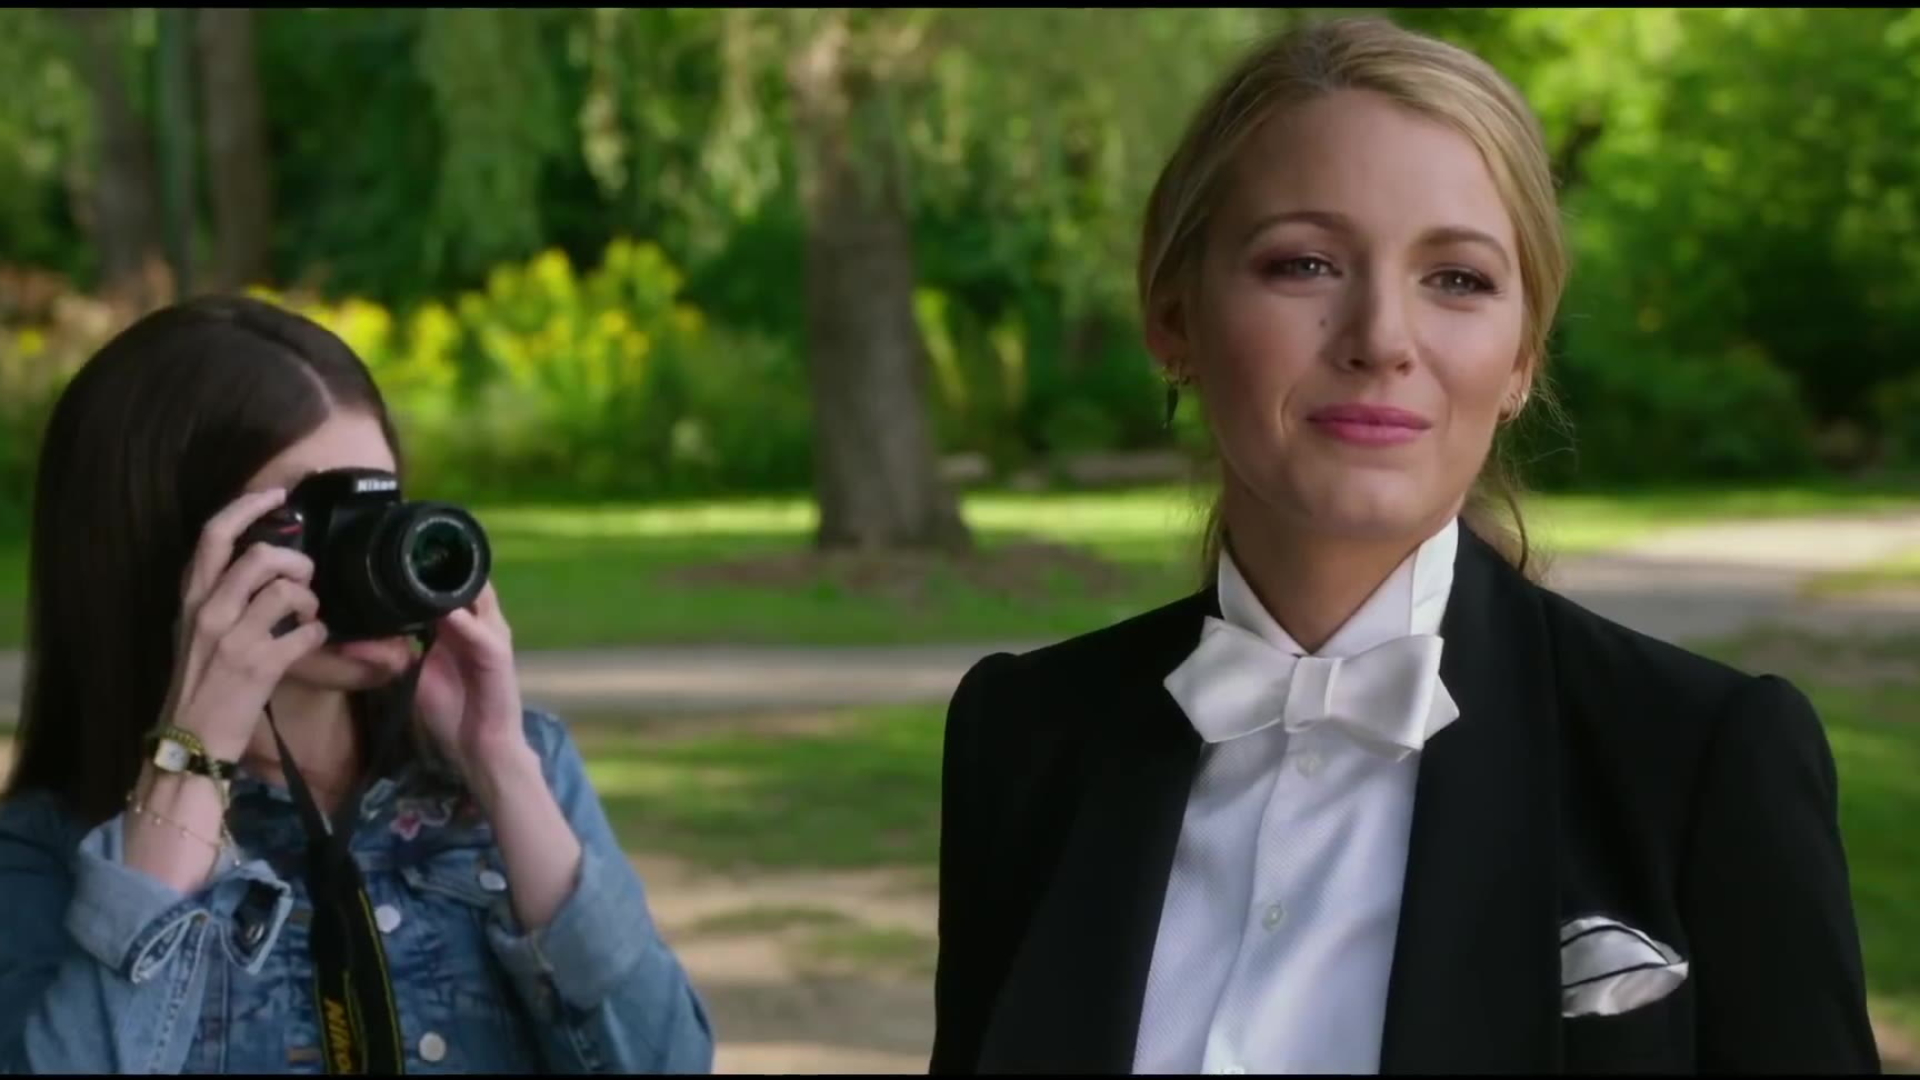 A Simple Favor review, Blake Lively, Anna Kendrick, 1920x1080 Full HD Desktop